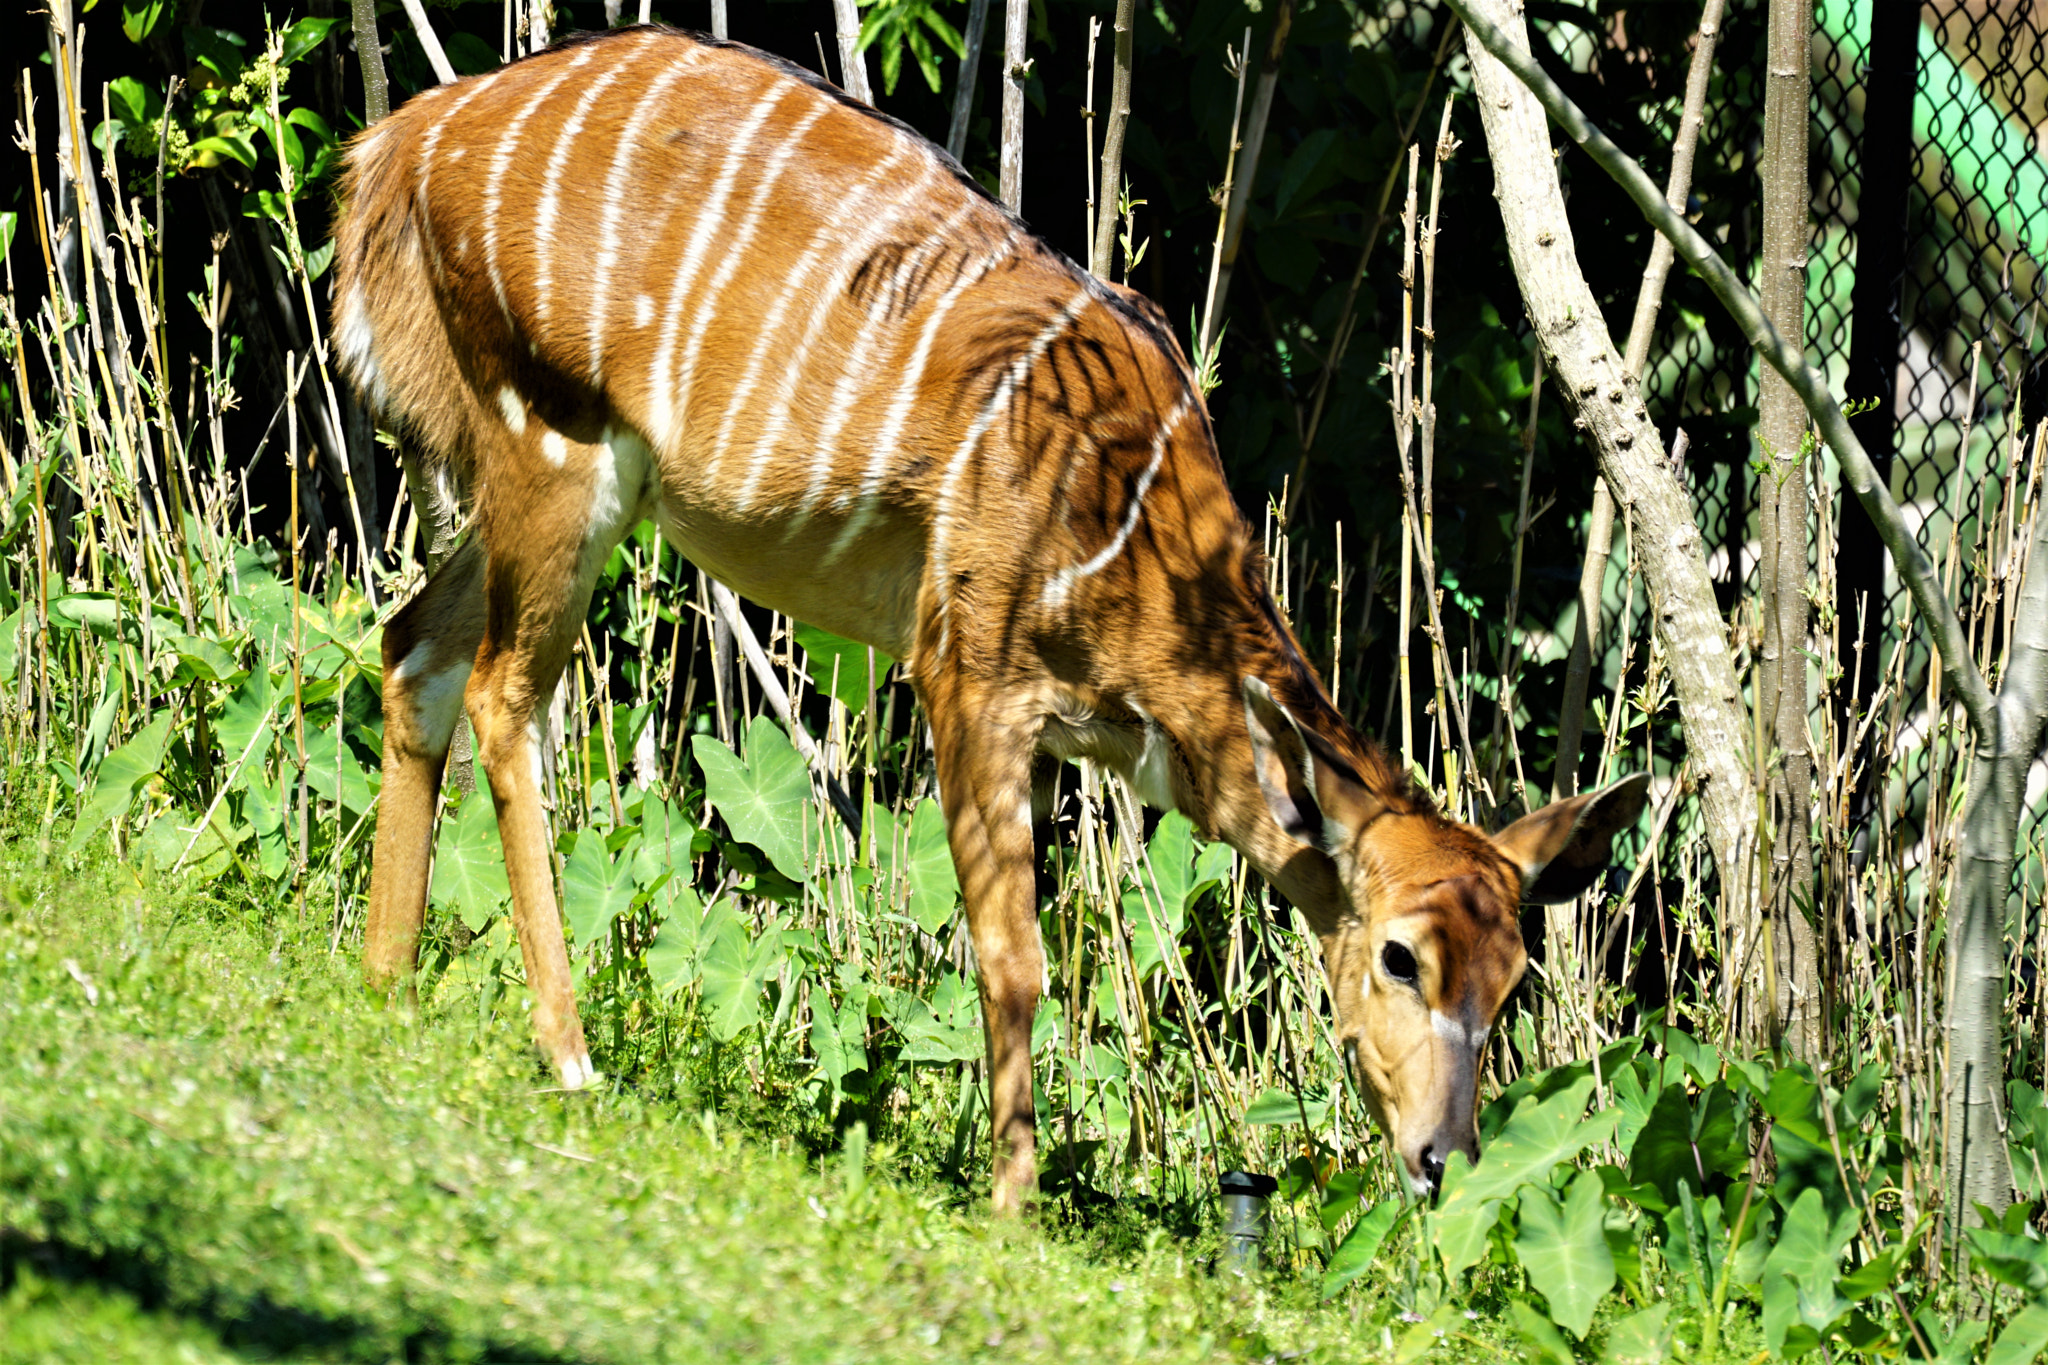 Sony a6000 sample photo. Striped antelope photography